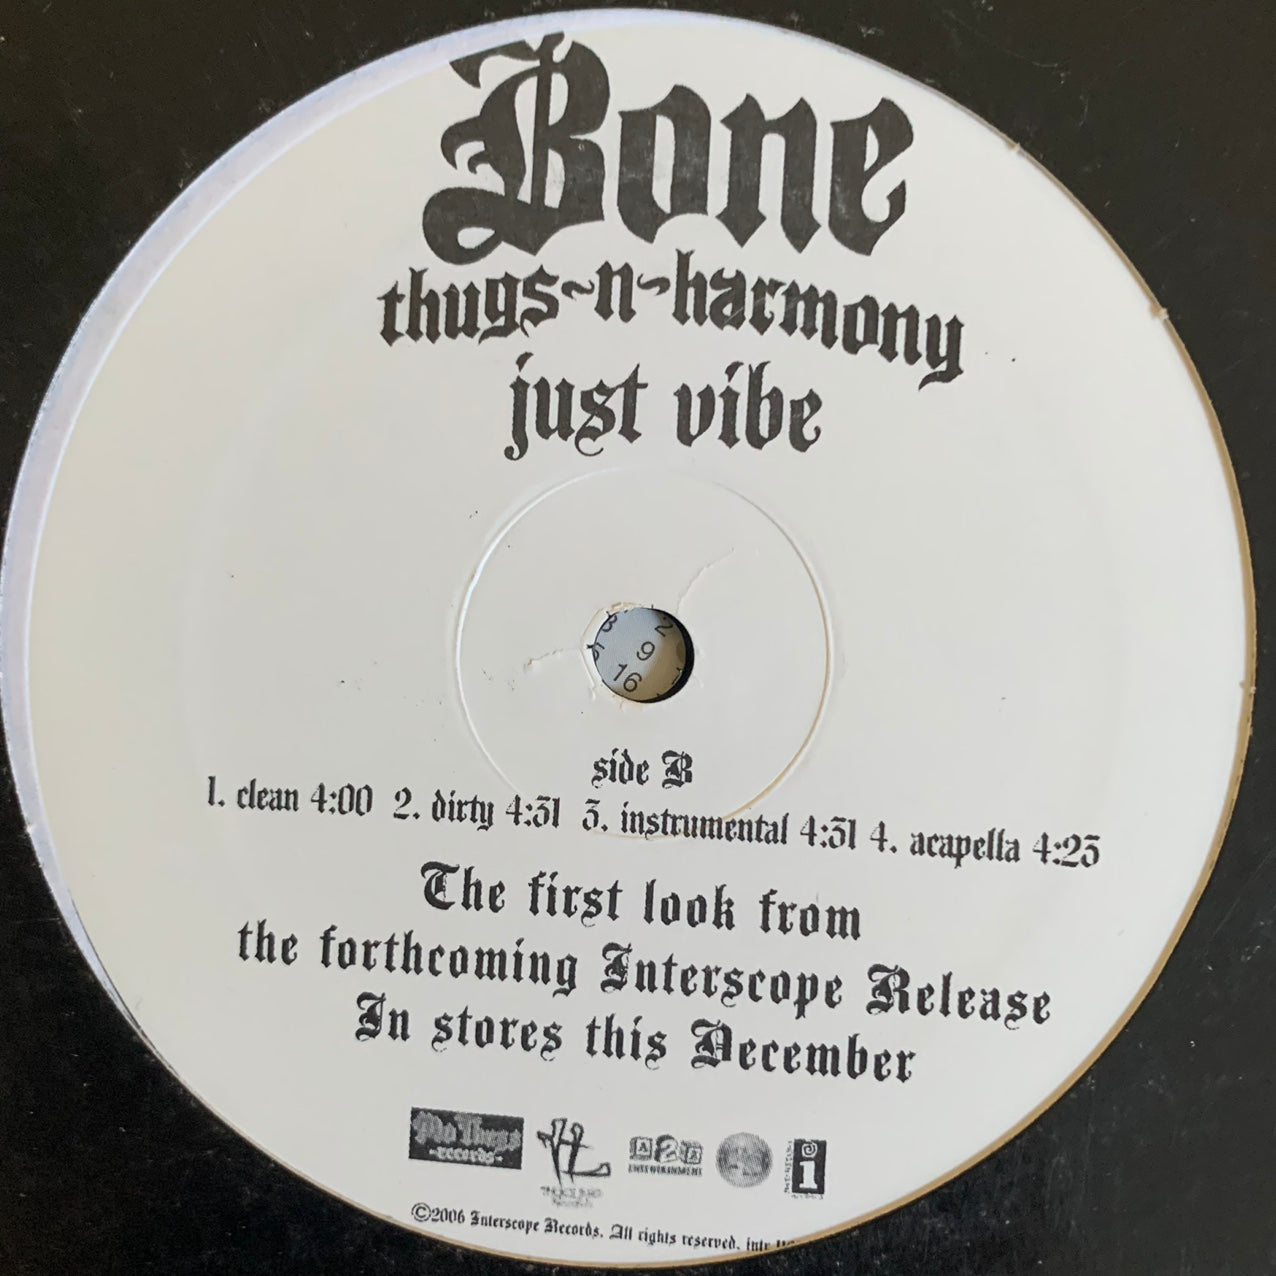 Bone Thugs-n-Harmony “Just Vibe” 8 Version 12inch Vinyl, Featuring Clean, Dirty, Instrumental and Acapella versions